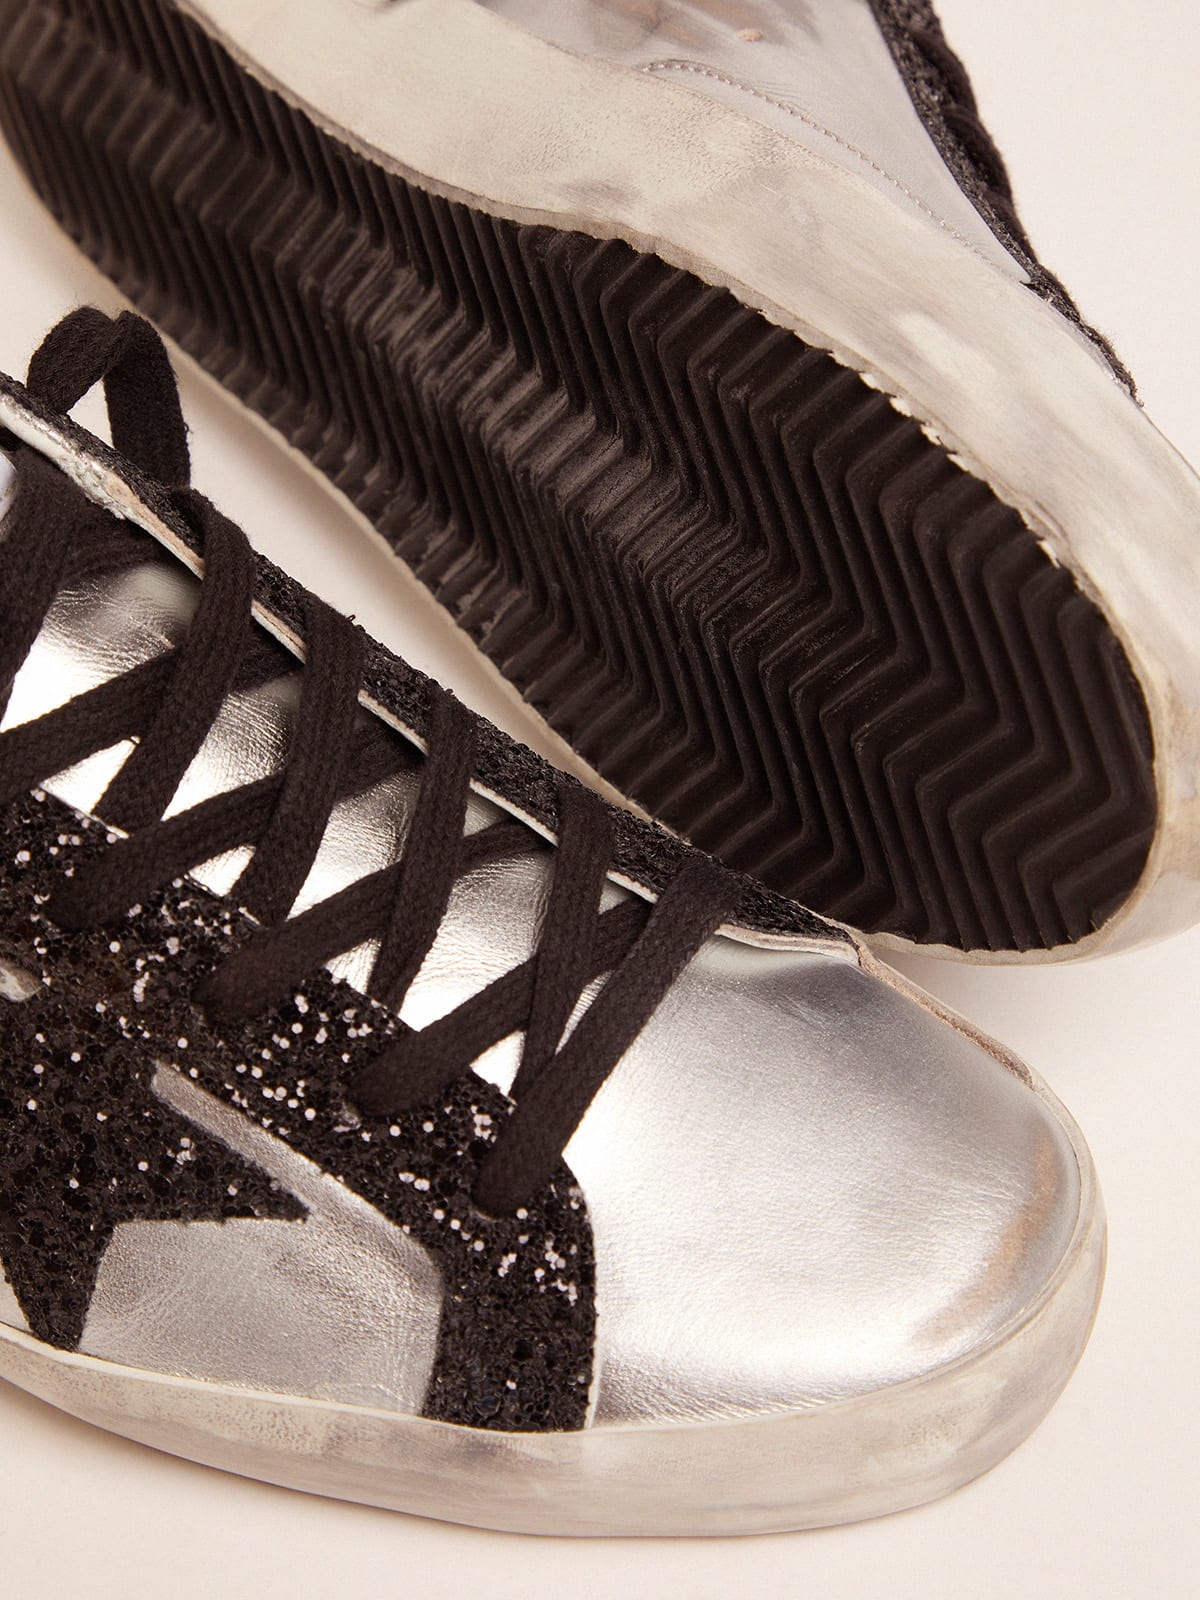 Silver Super-Star sneakers with glitter details | Golden Goose